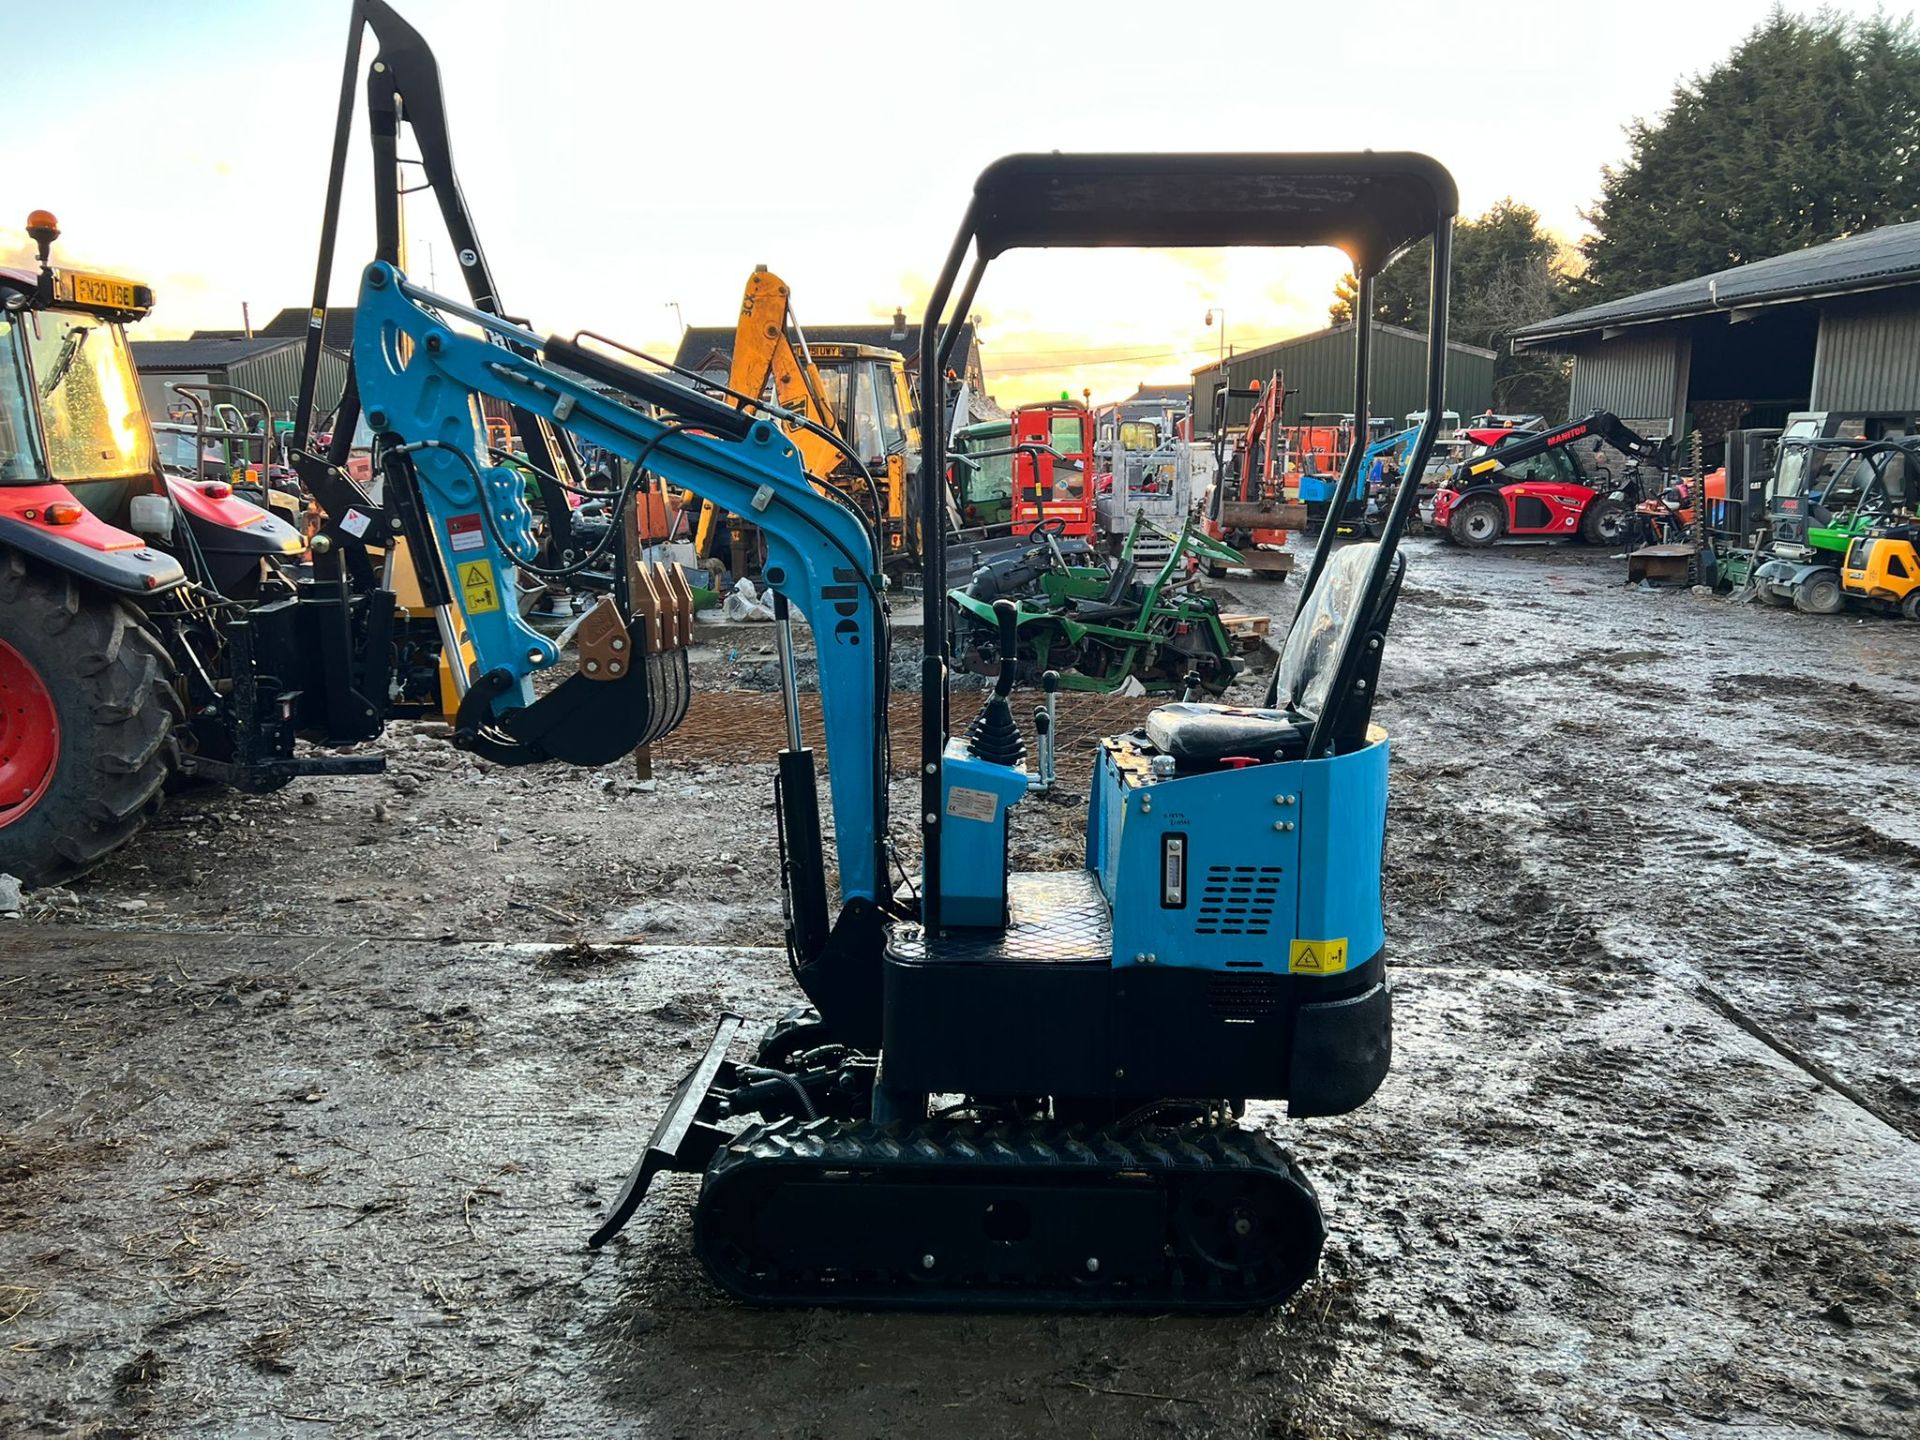 NEW AND UNUSED JPC HT12 1 TON MINI DIGGER, RUNS DRIVES AND DIGS, PIPED FOR FRONT ATTACHMENTS - Image 4 of 11